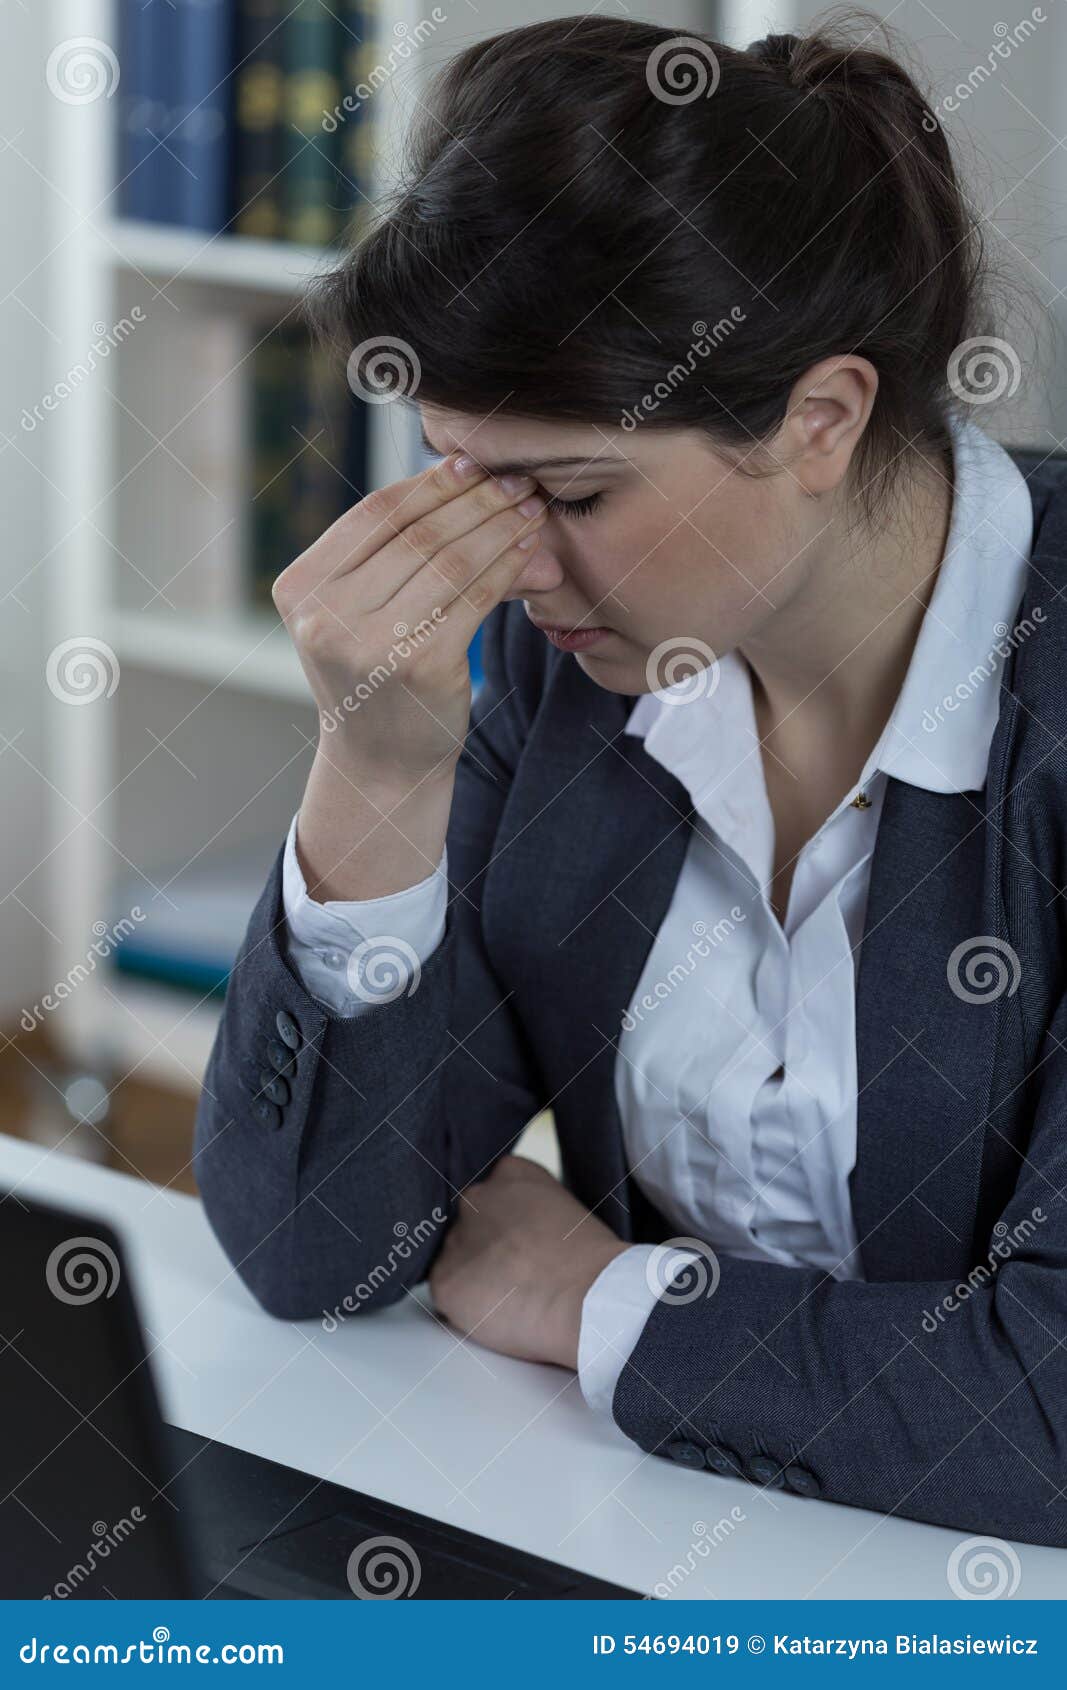 office worker with sinusitis